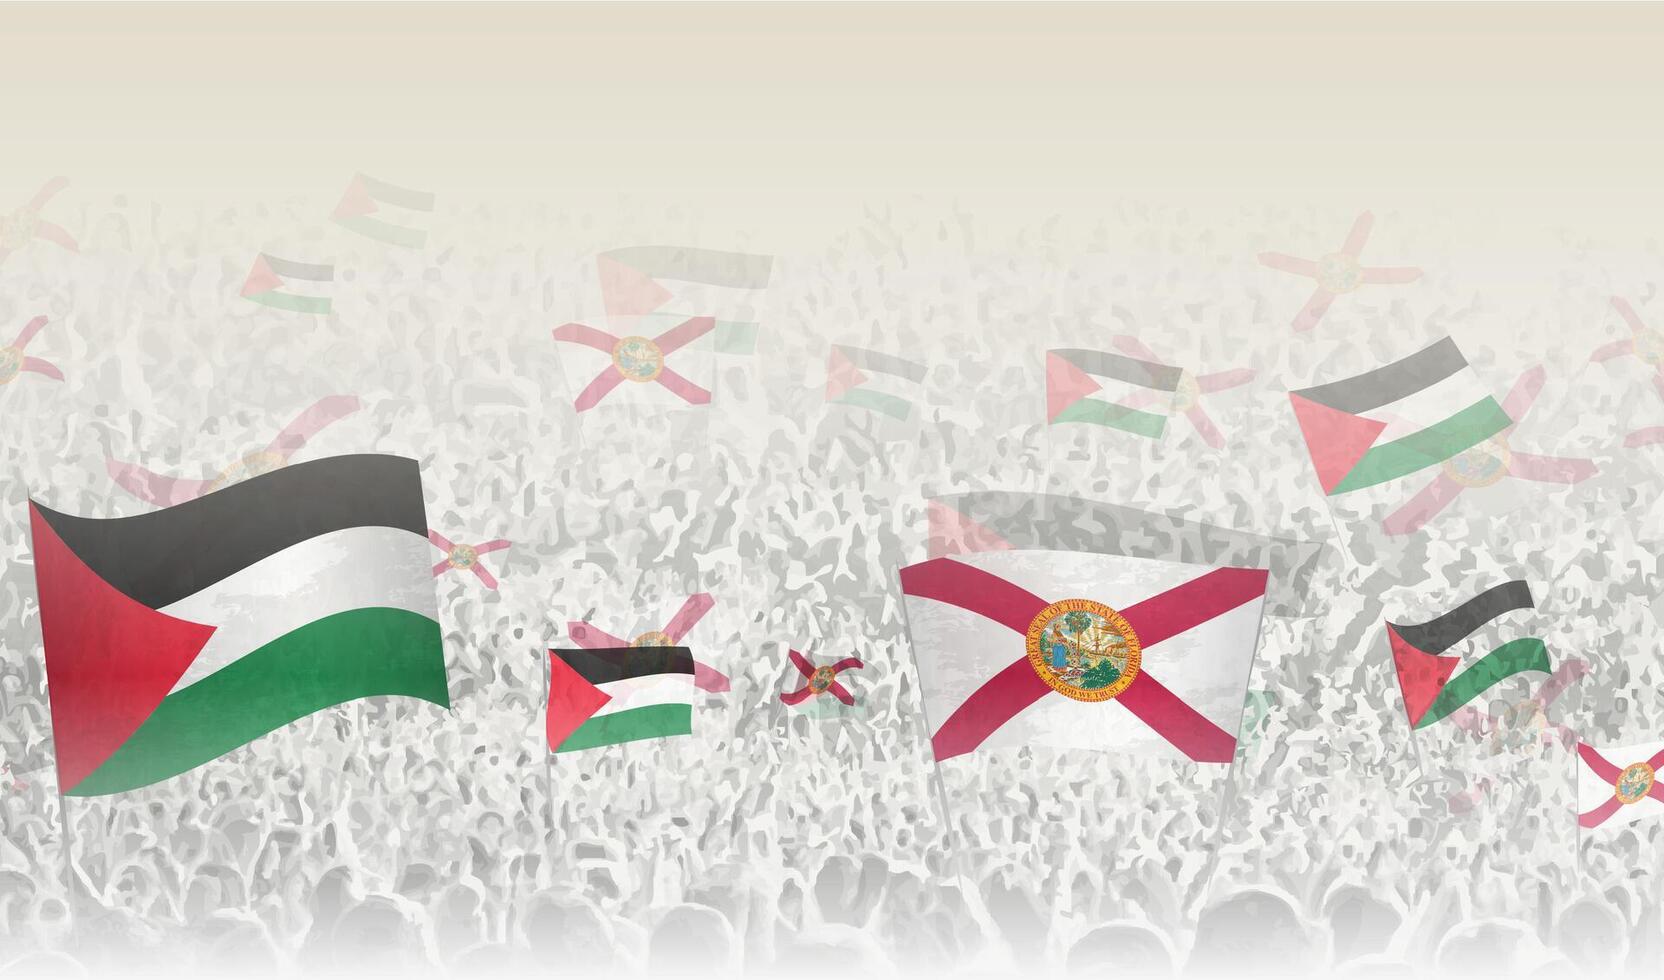 Palestine and Florida flags in a crowd of cheering people. vector